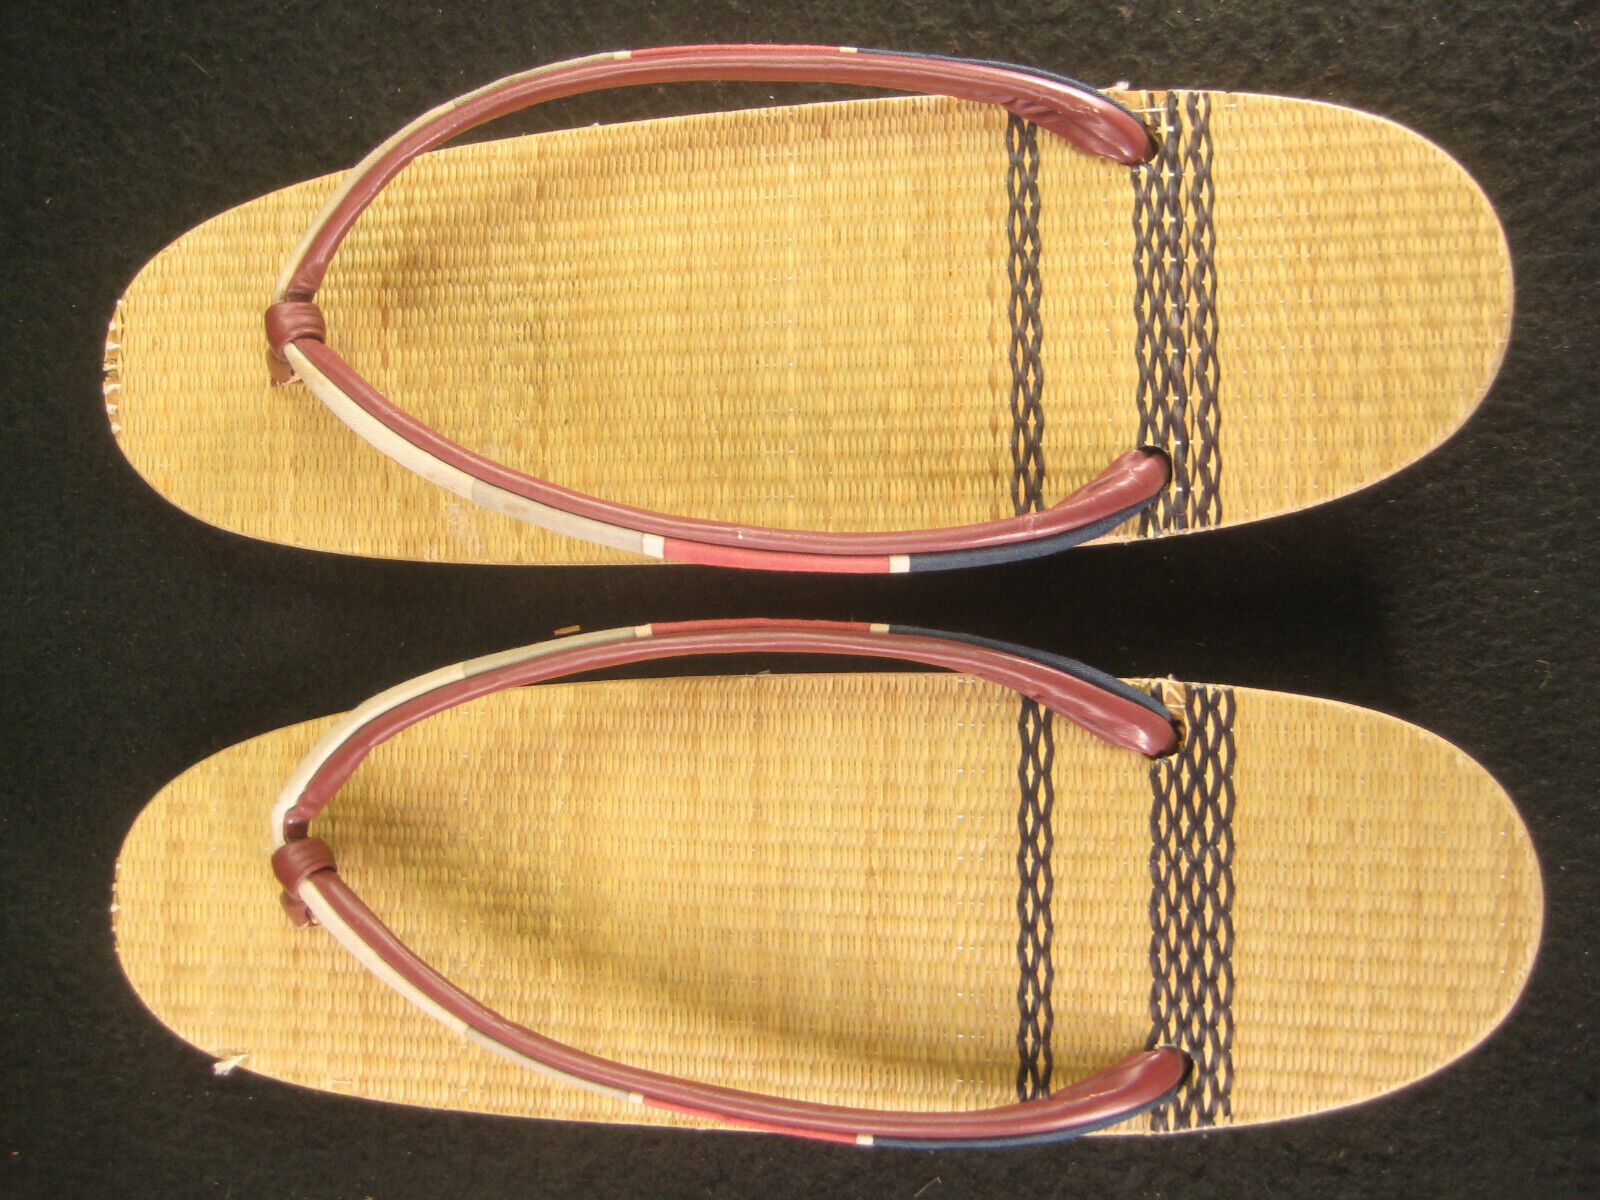 Setta Shoes Sandles FormalMade Of Rice Straw Footbed Leather Sole